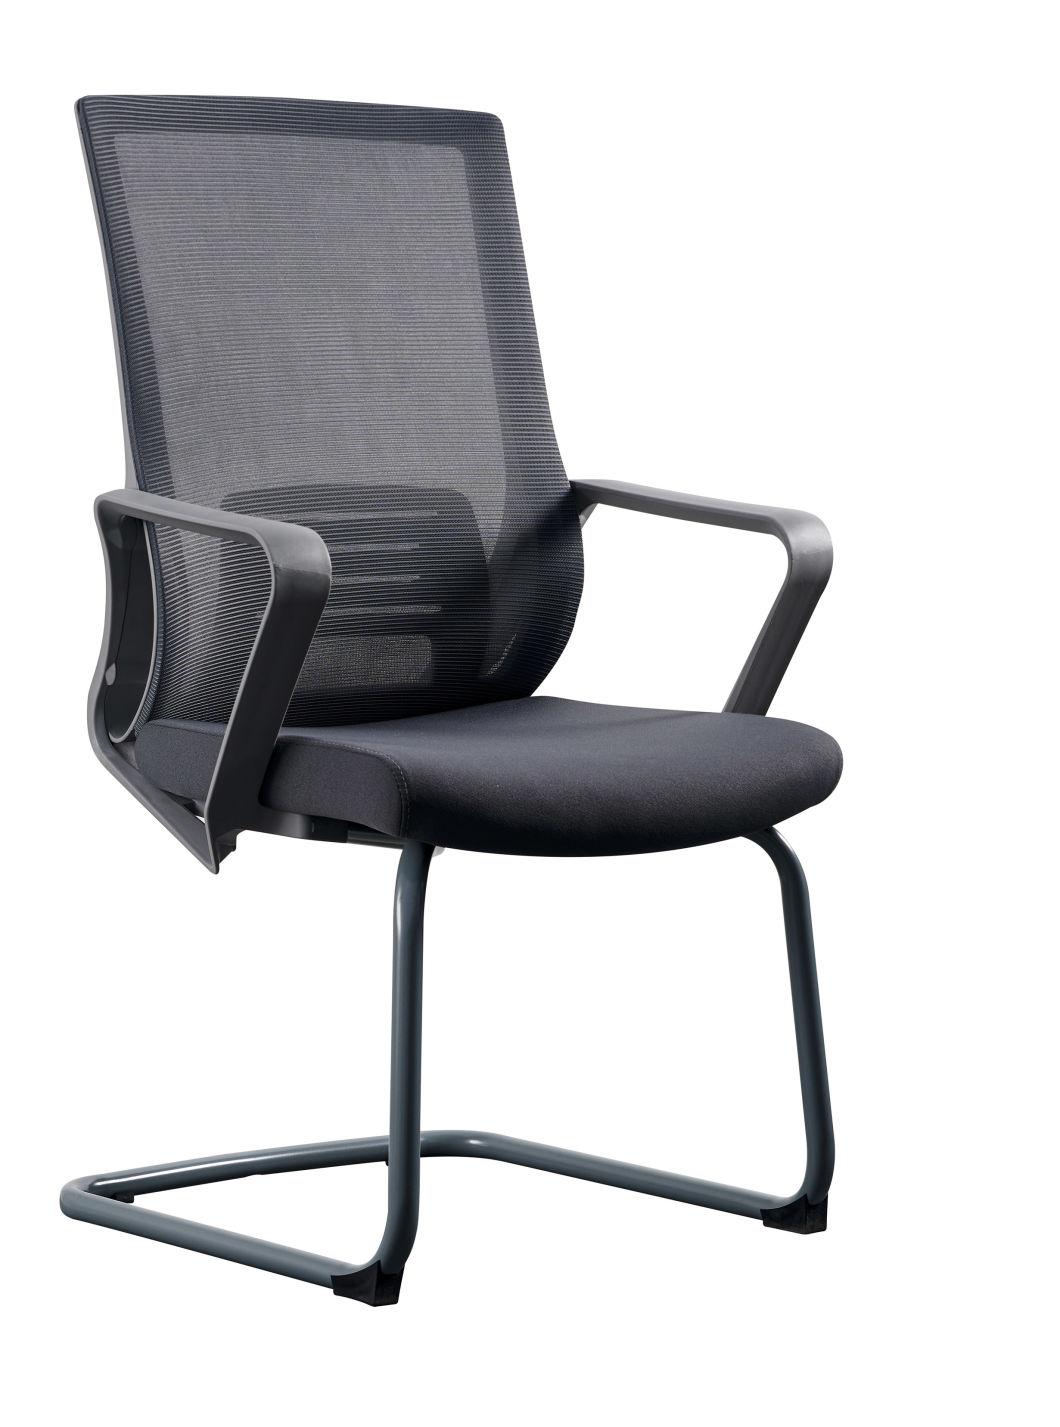 Anti-Sound Wheels Armrest and Backrest Office Mesh Chairs